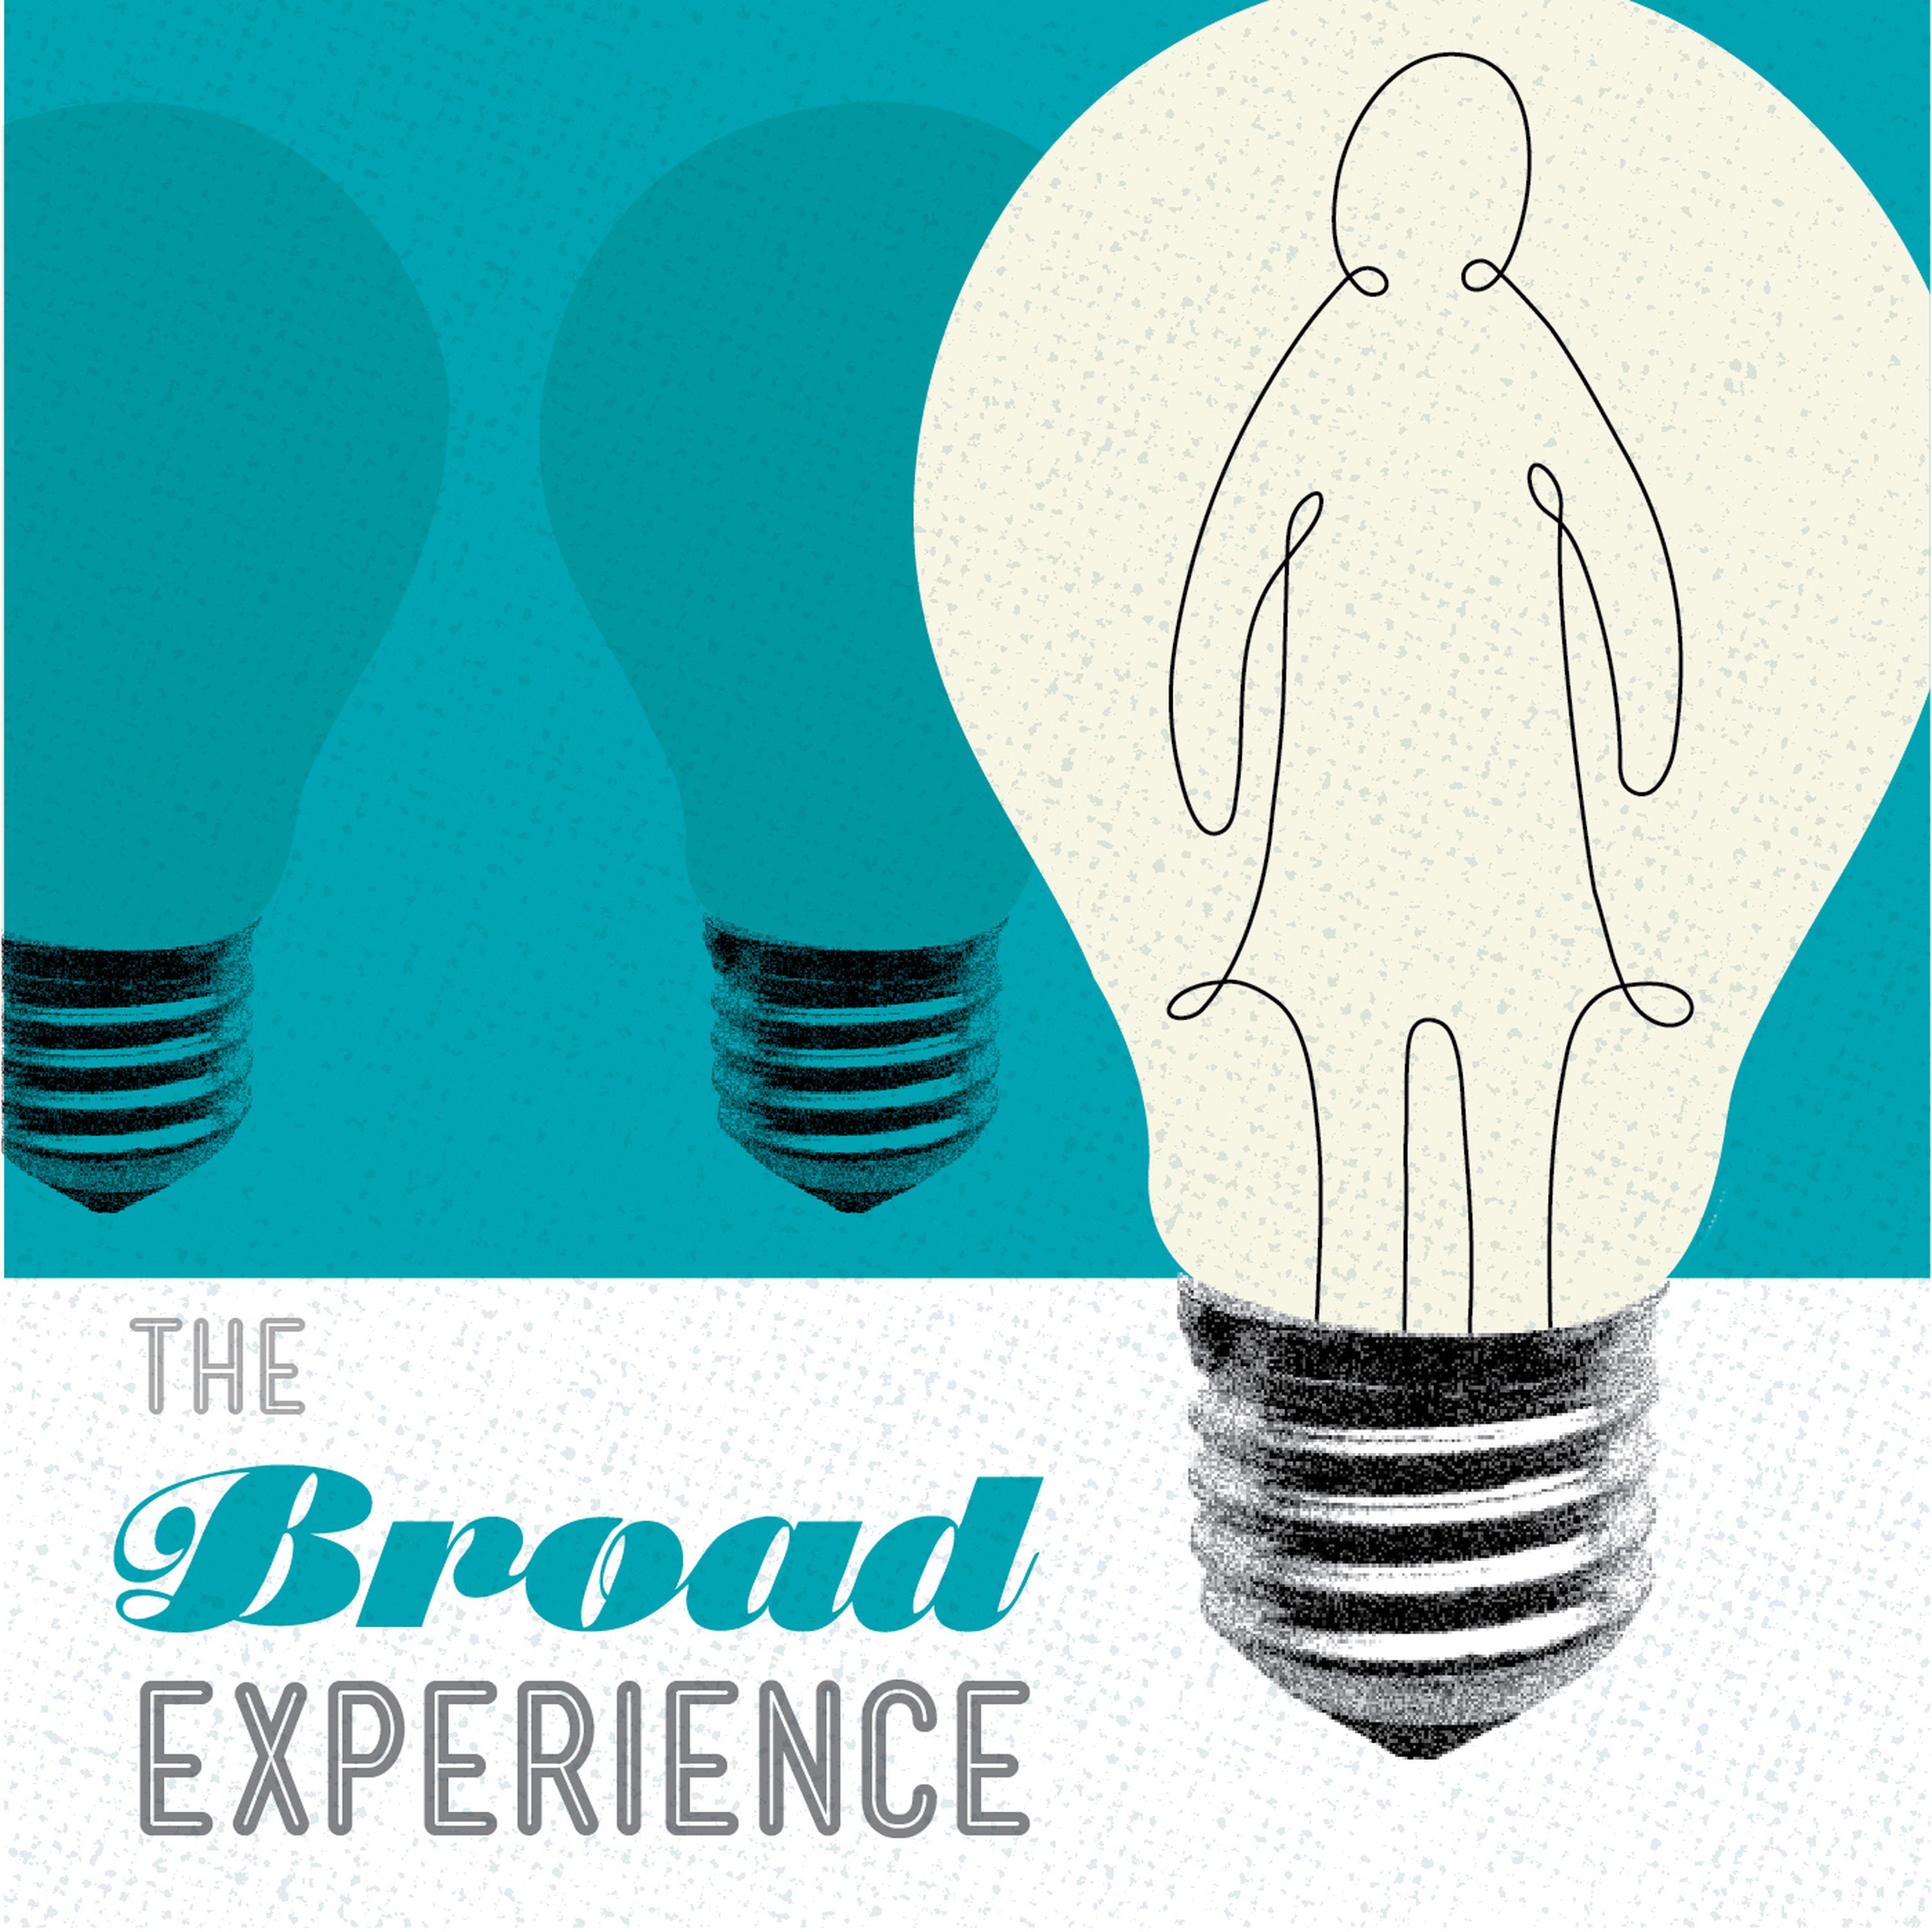 The Broad Experience 37: Leaning In (re-release)